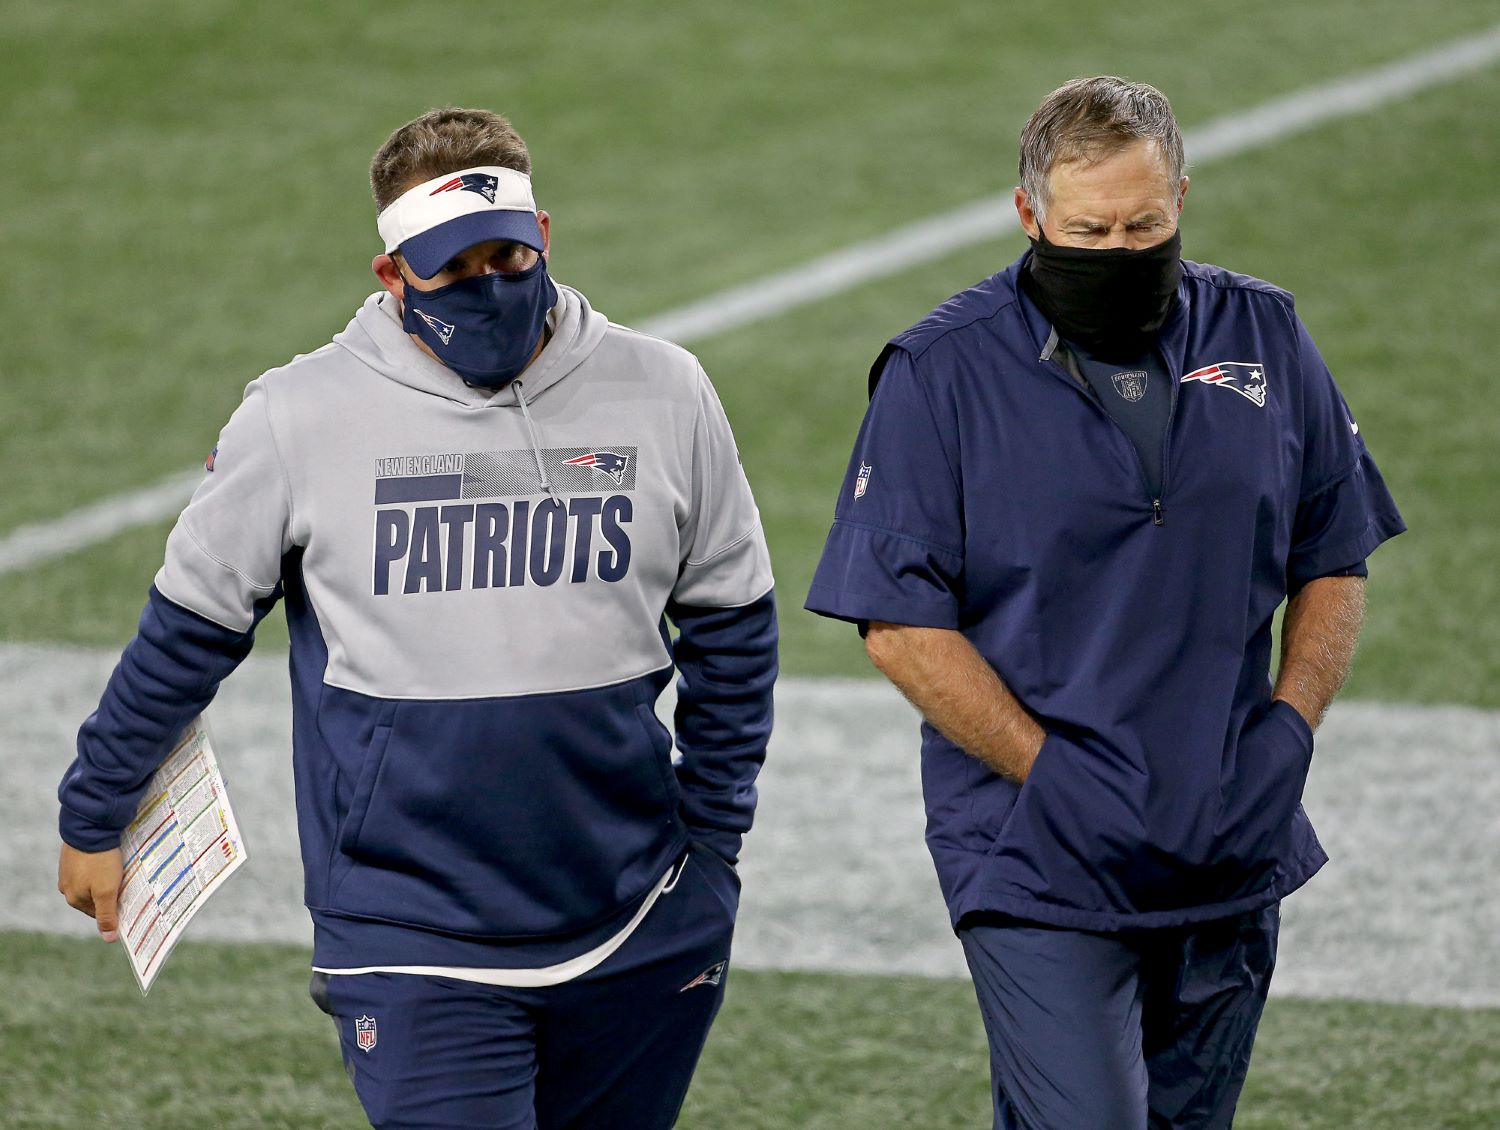 Josh McDaniels just increased his chances of replacing Bill Belichick with the latest report that the Texans will not pursue the Patriots offensive coordinator for their head coach vacancy.